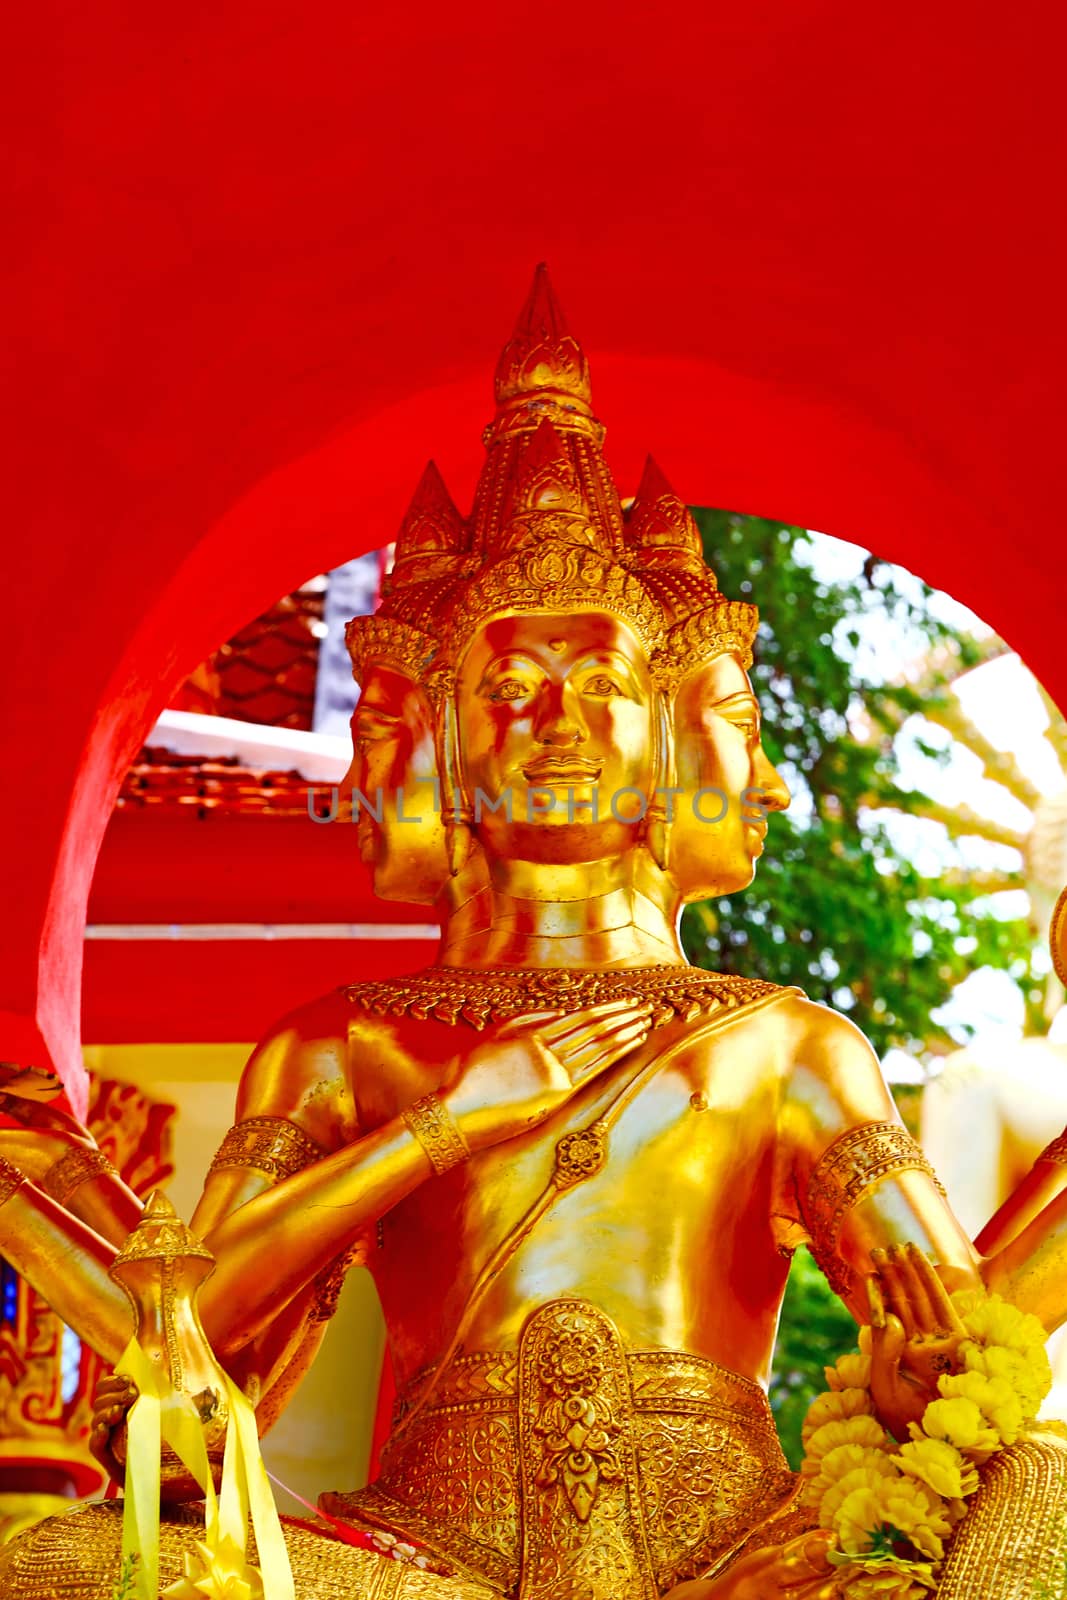 siddharta   in the temple bangkok asia   red three face by lkpro